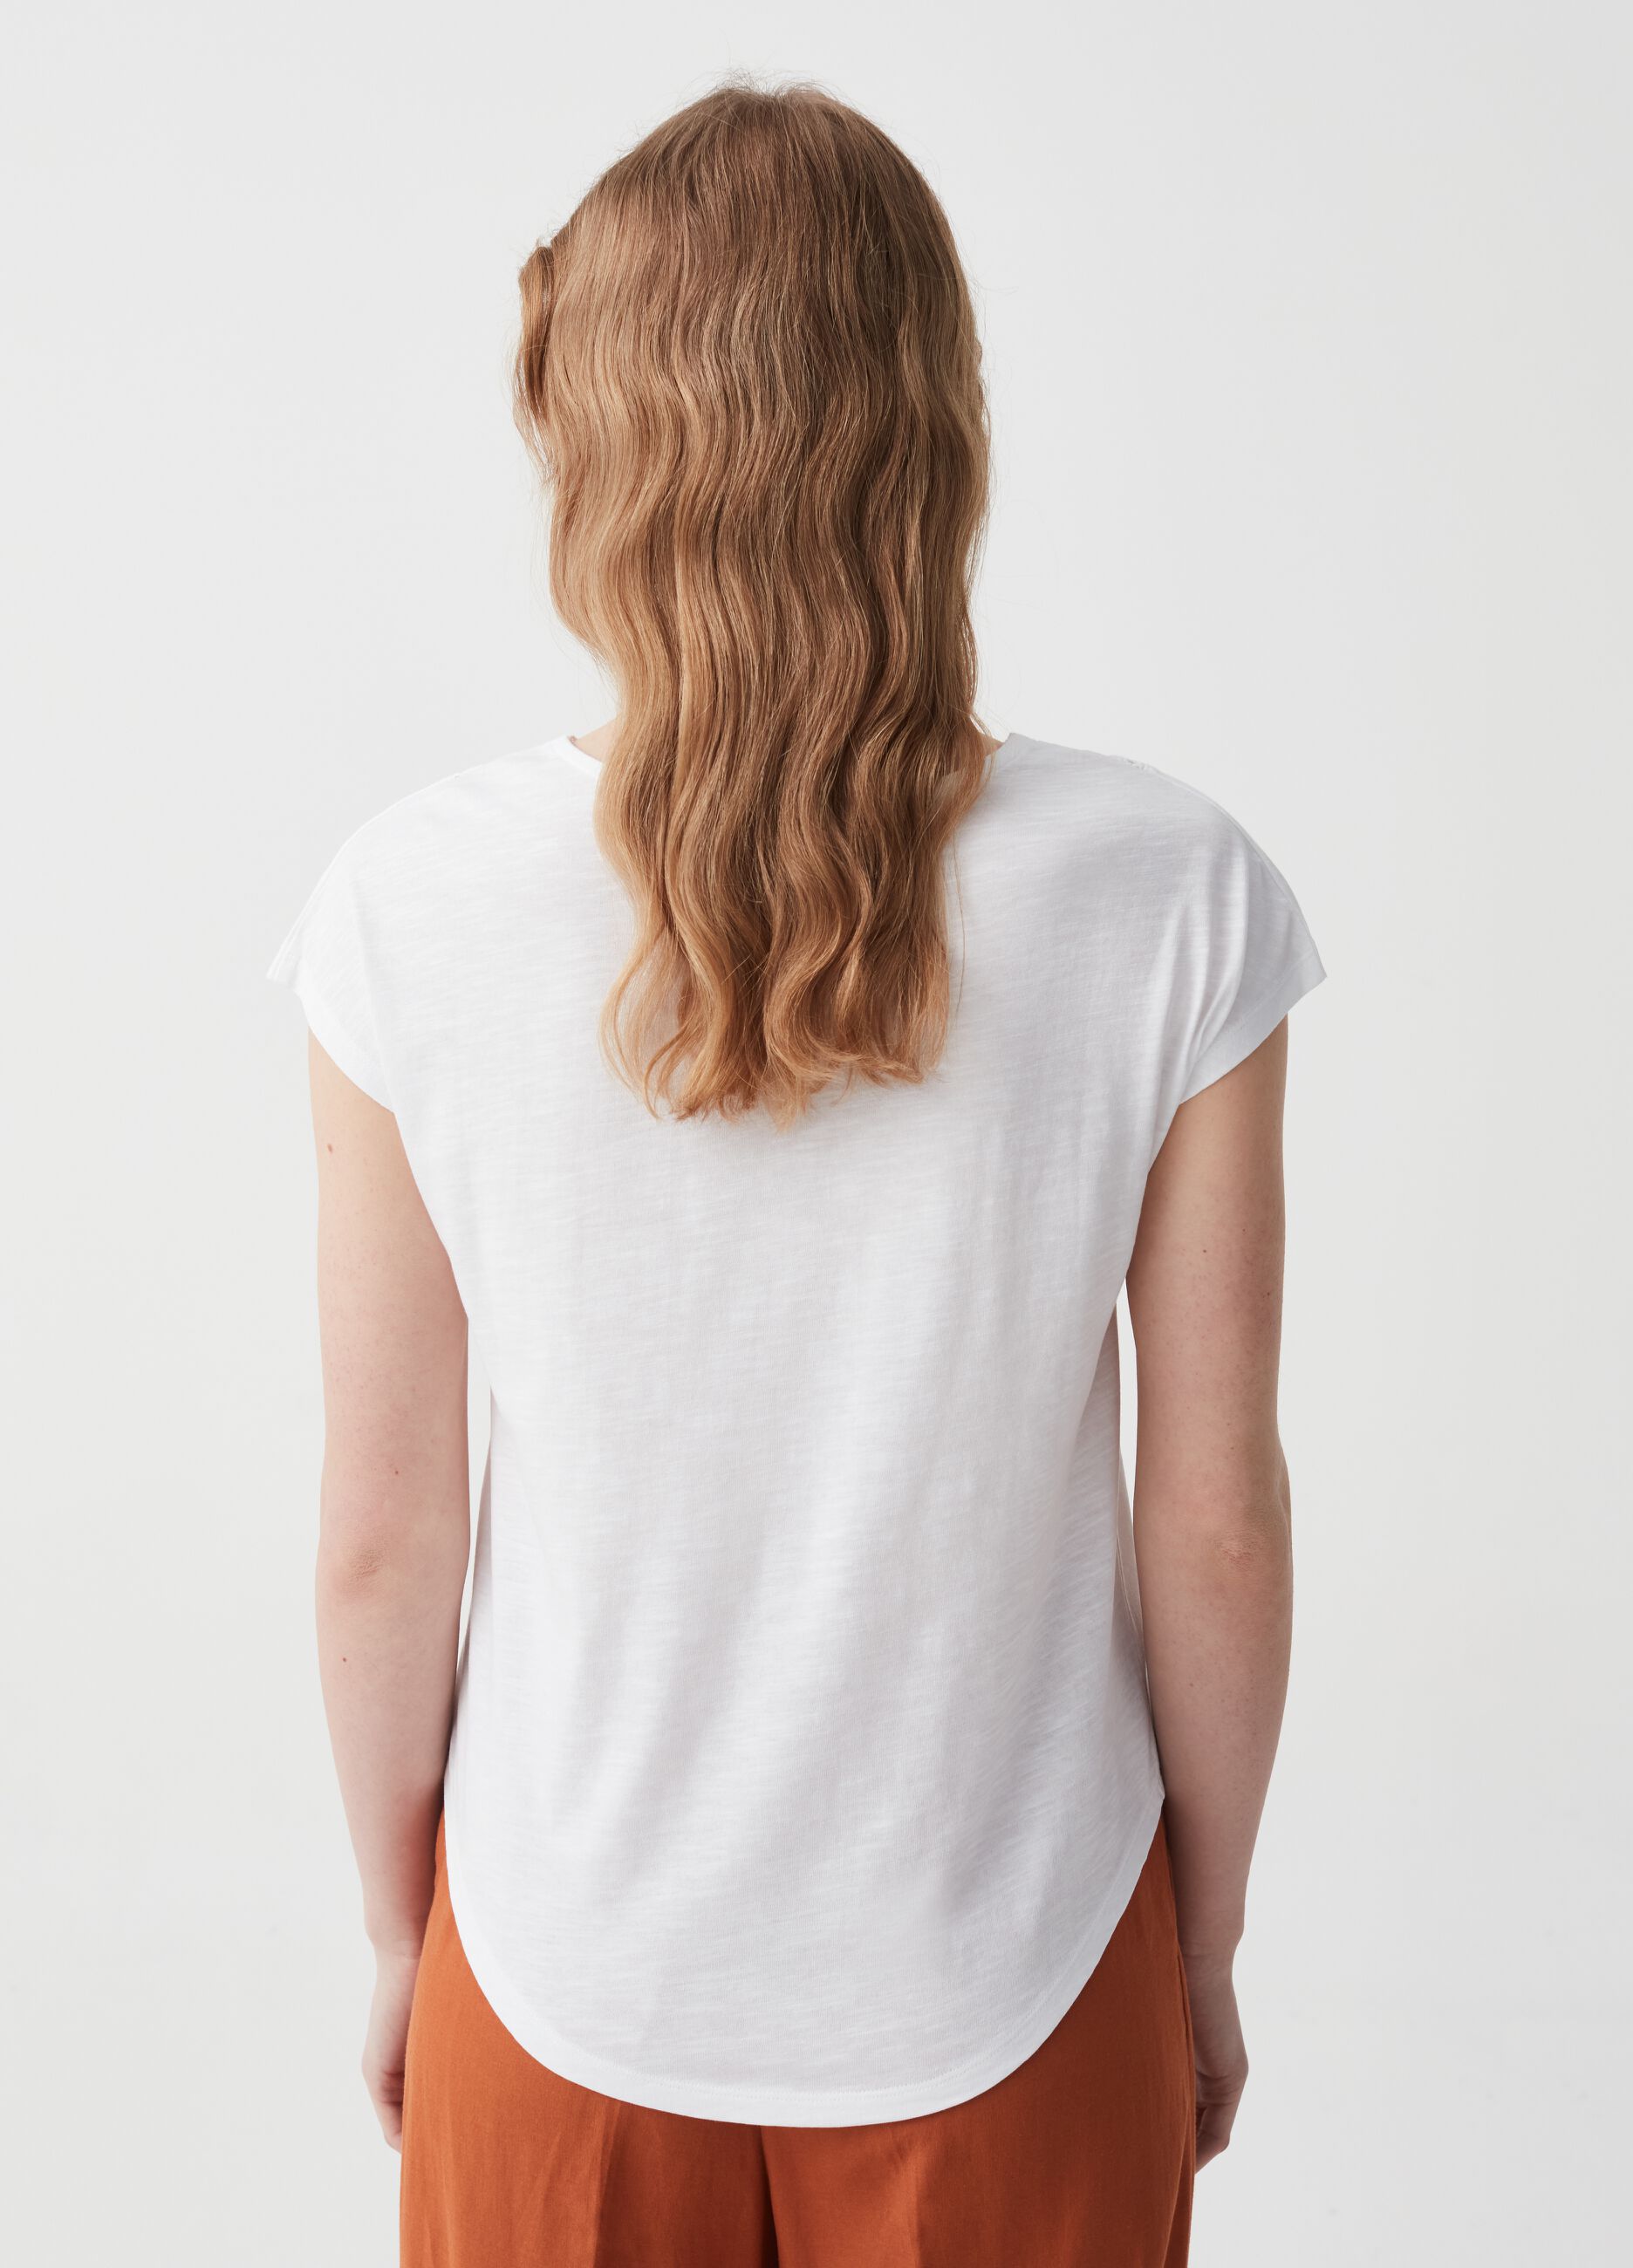 T-shirt with openwork and lace details